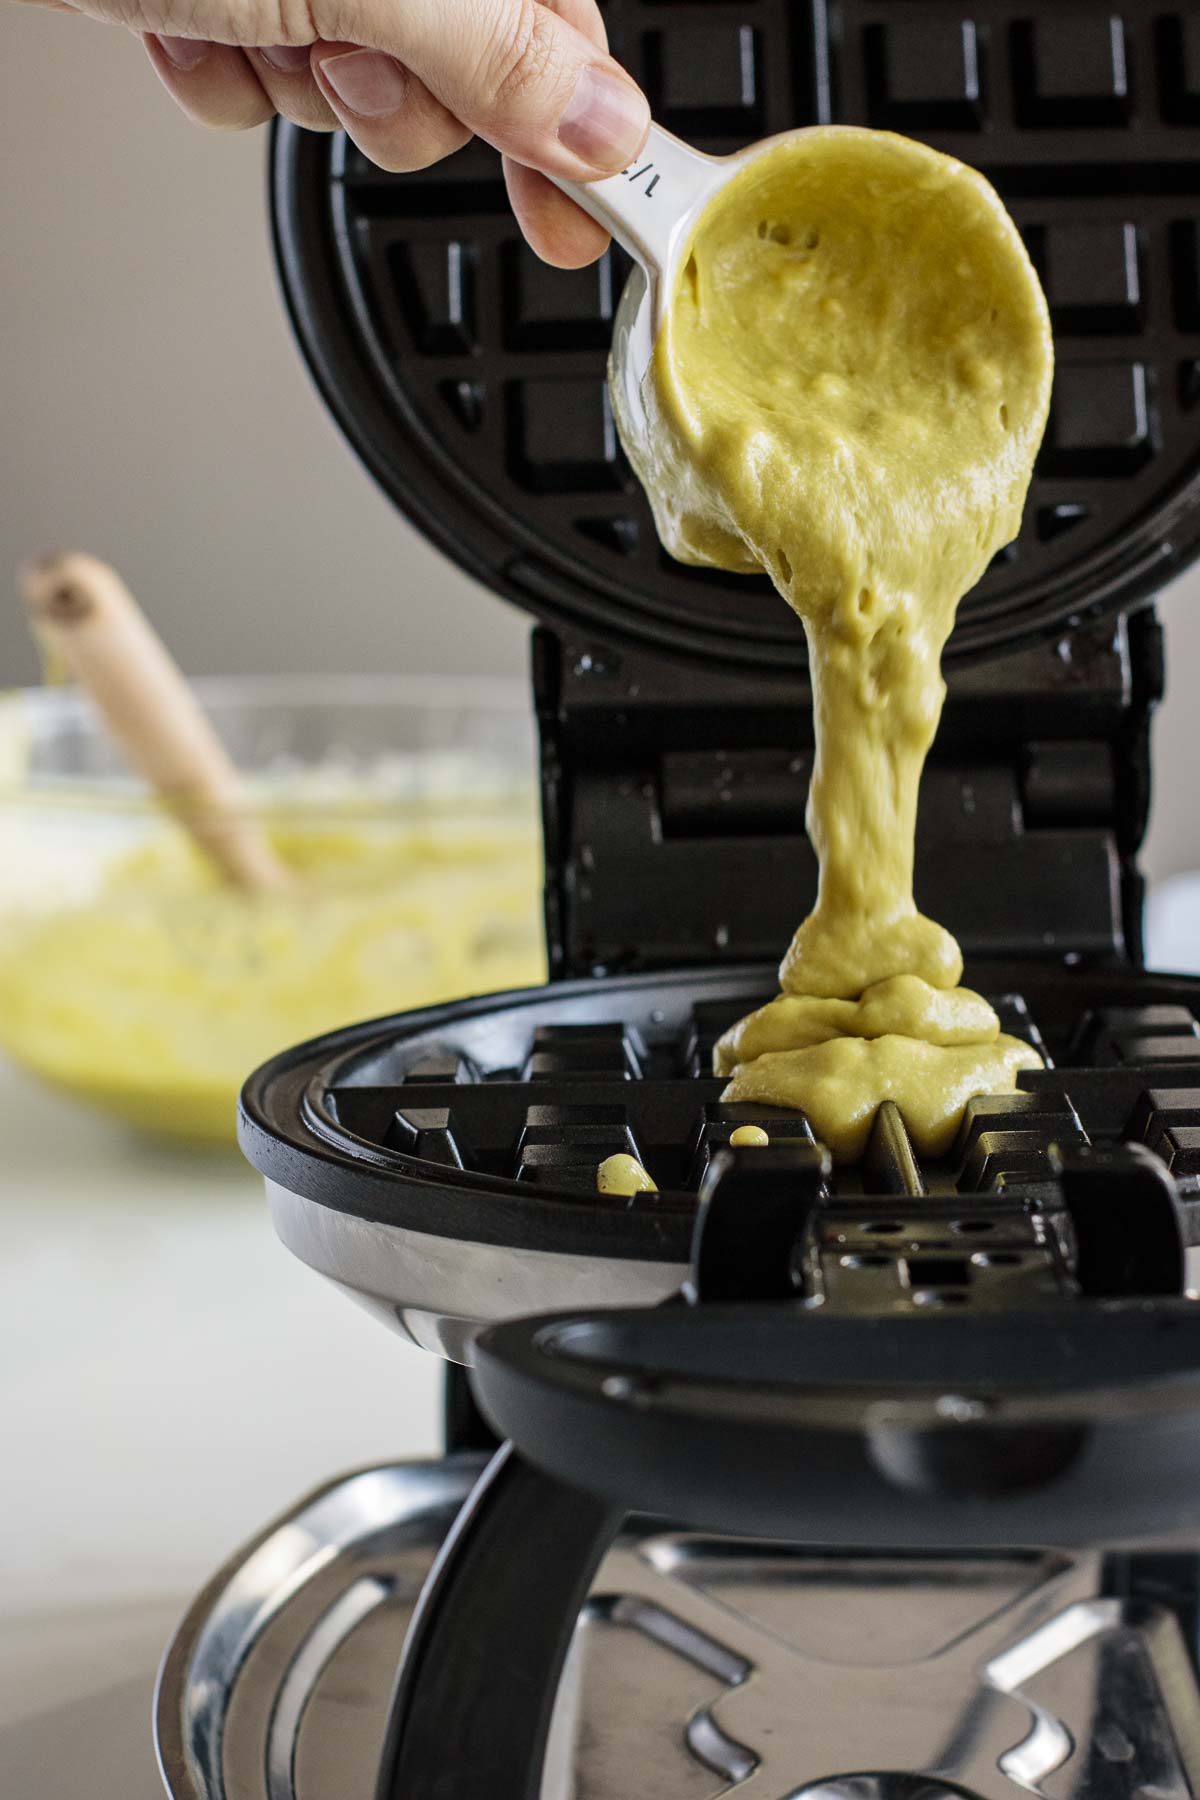 Batter being poured in preheated waffle iron.